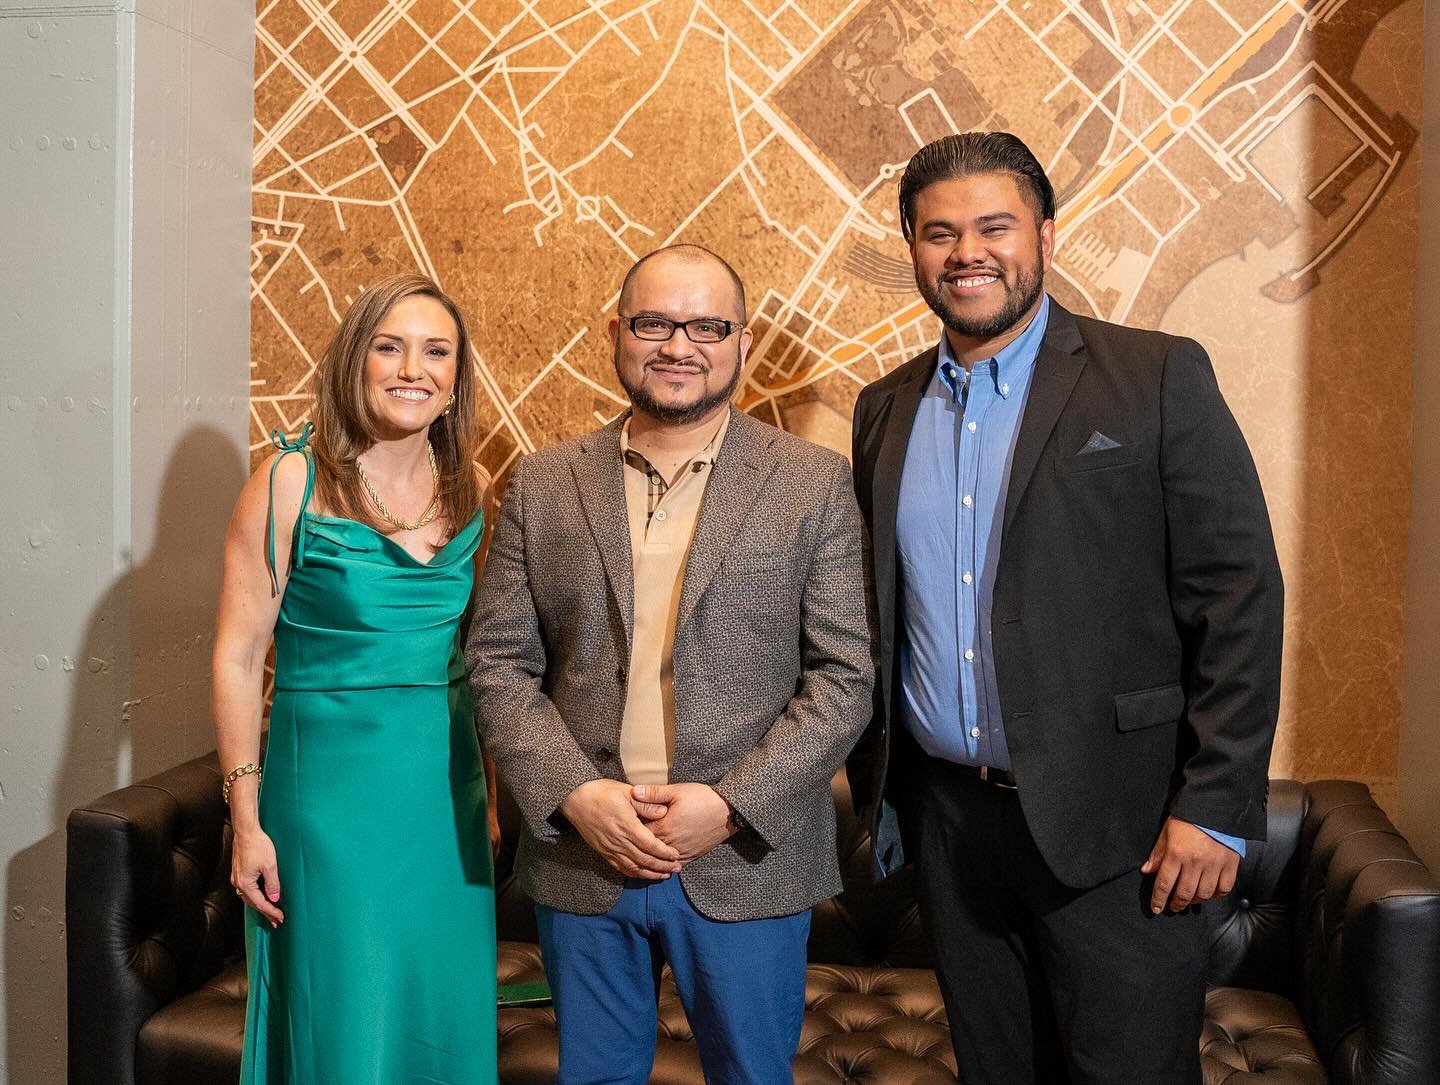 A wonderful night at @eatcatalu. We are grateful for our partnership with @mannyaflores and @quehospitality. A special shoutout to our team at @7thpeakmarketing for their hard work last night.

📸 @ciscosart_